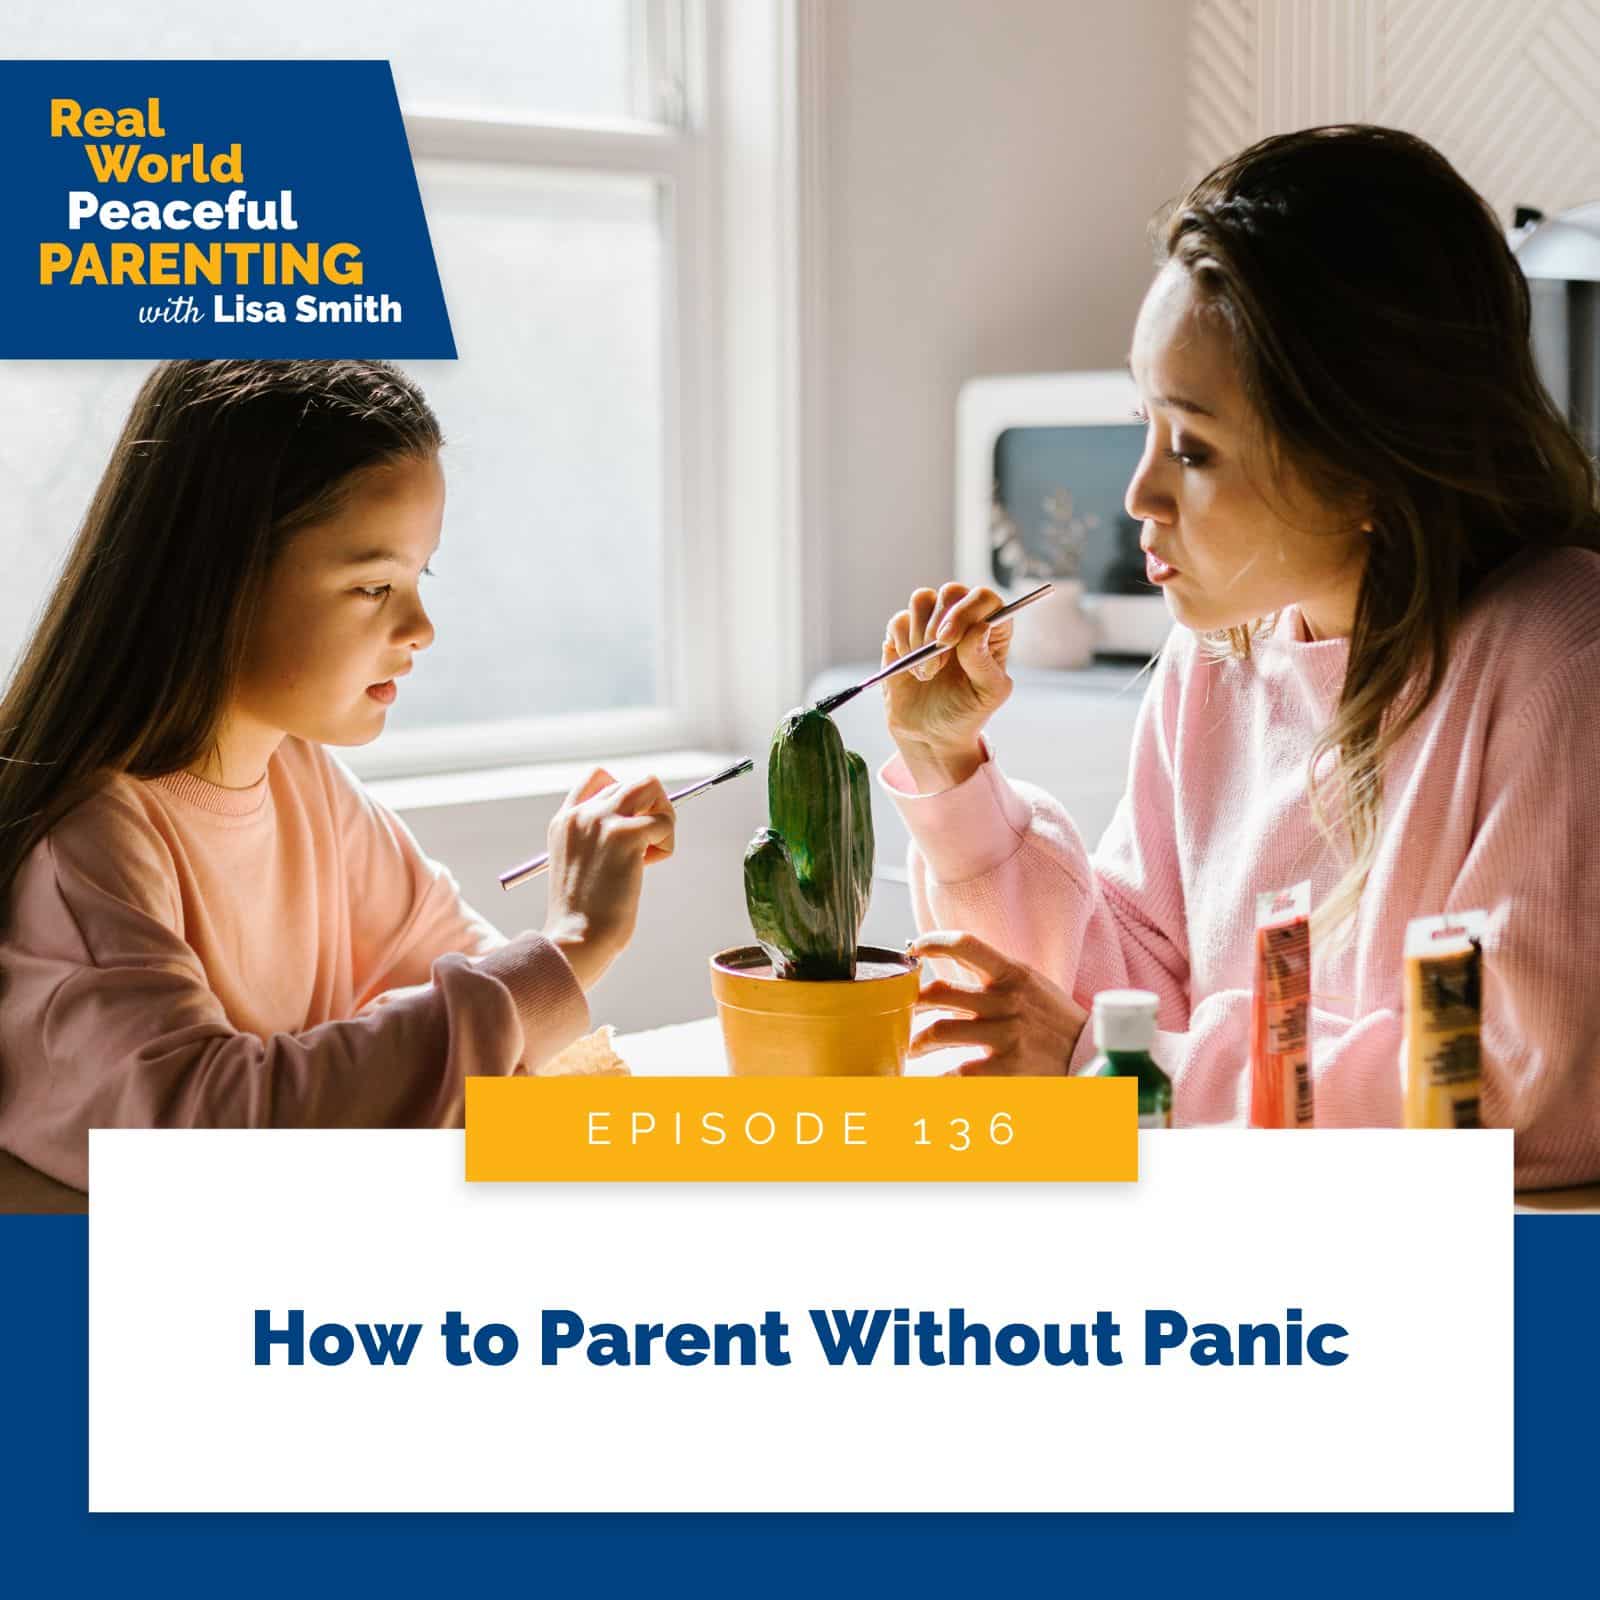 Real World Peaceful Parenting Lisa Smith | How to Parent Without Panic